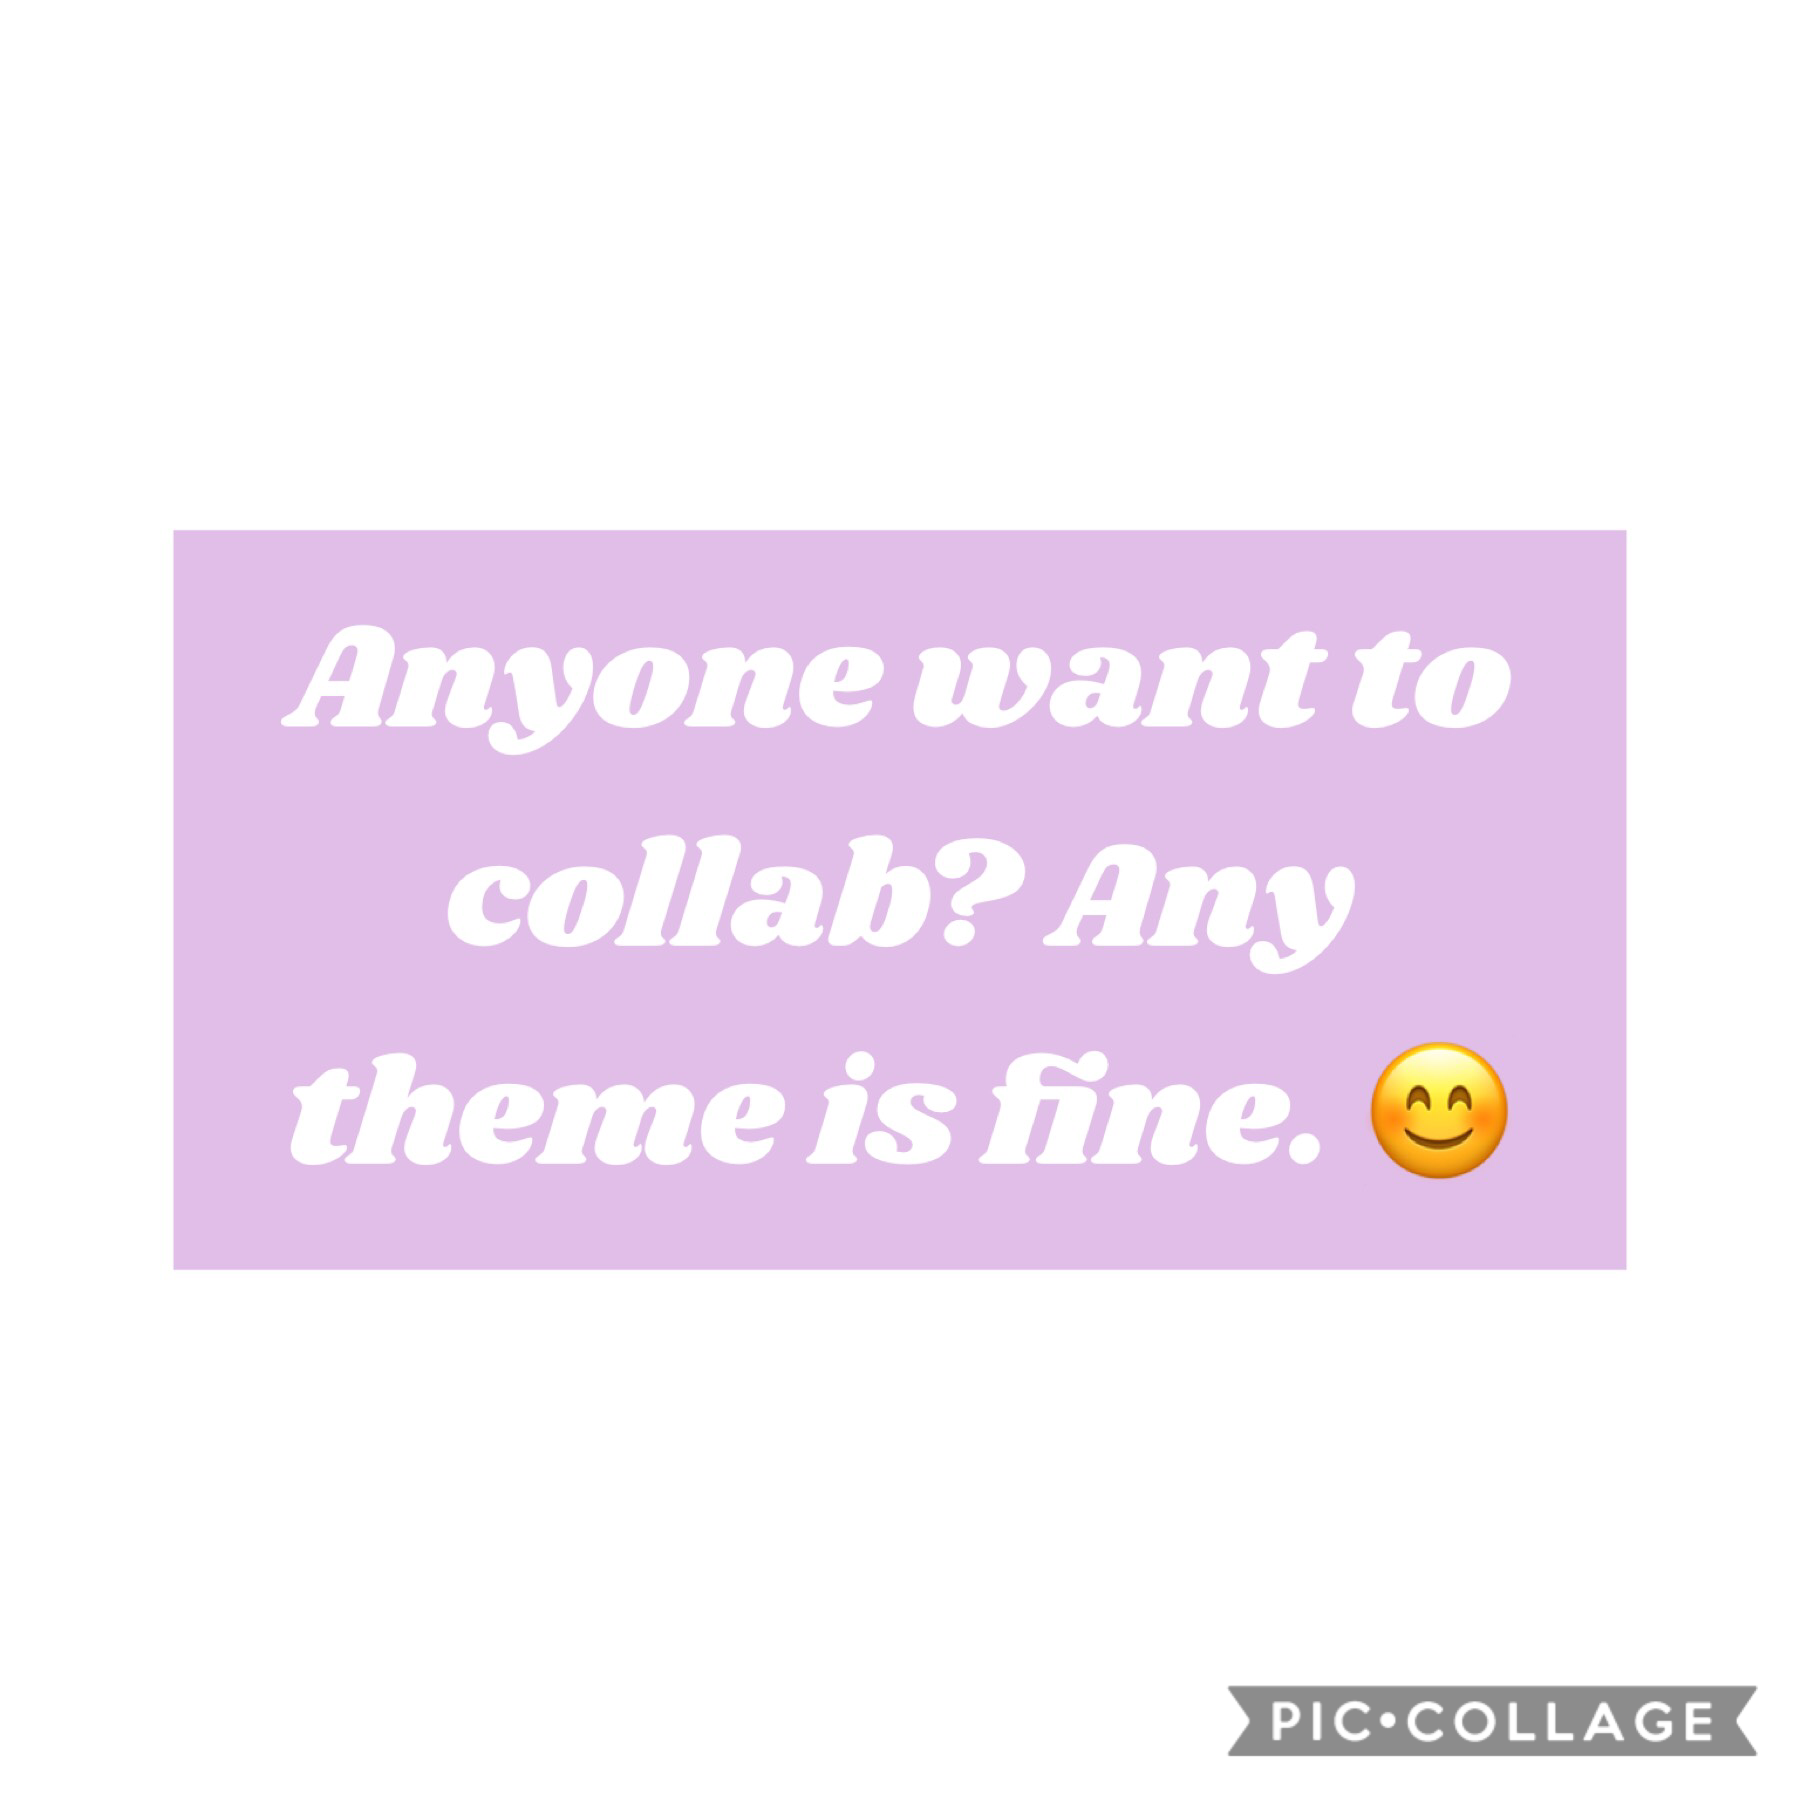 Collabs?! 💜😊